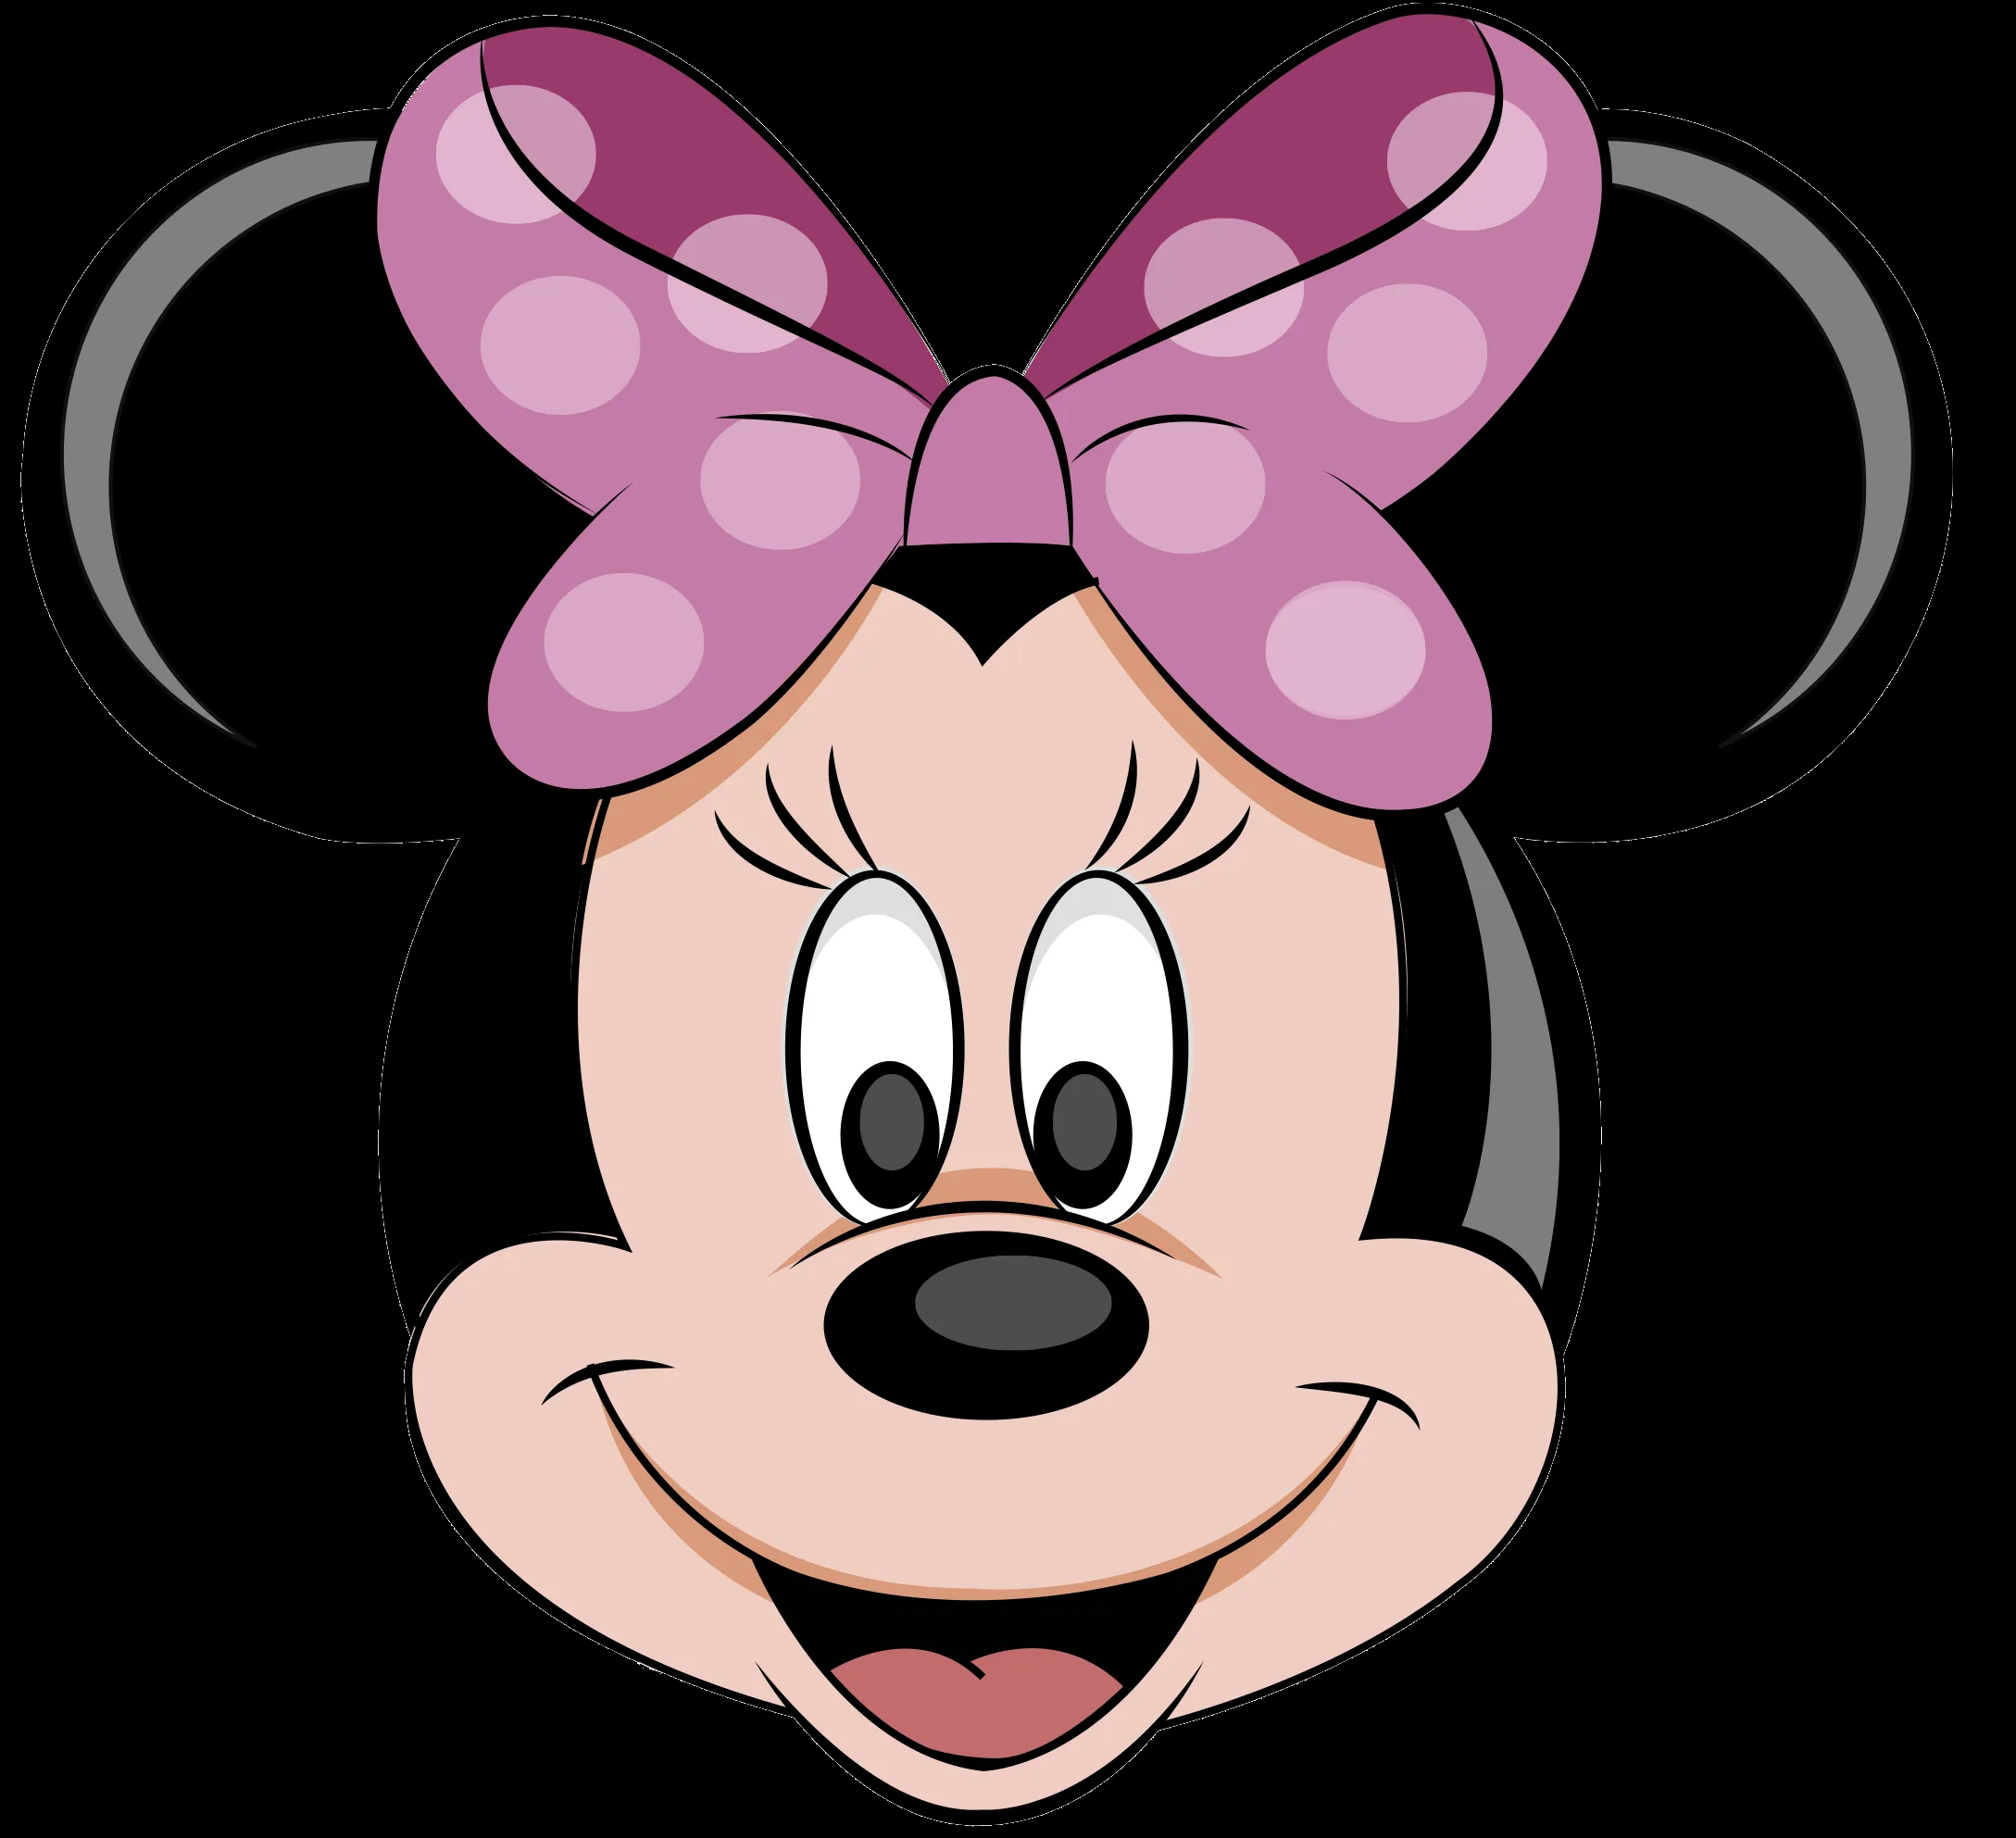 Pink Minnie Mouse Png | Clipart Panda - Free Clipart Images ...